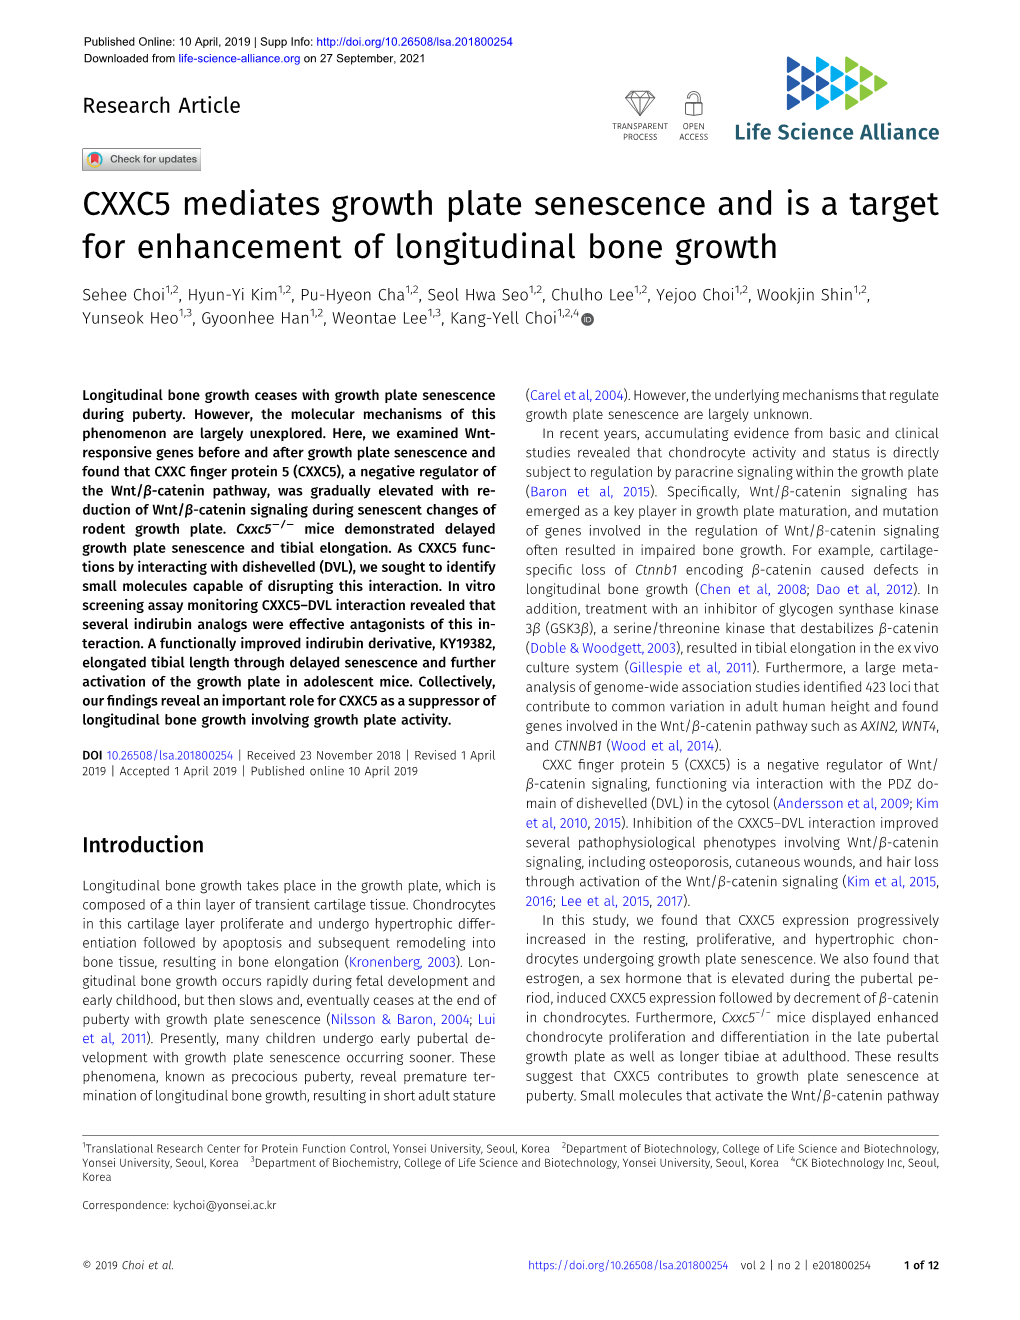 CXXC5 Mediates Growth Plate Senescence and Is a Target for Enhancement of Longitudinal Bone Growth